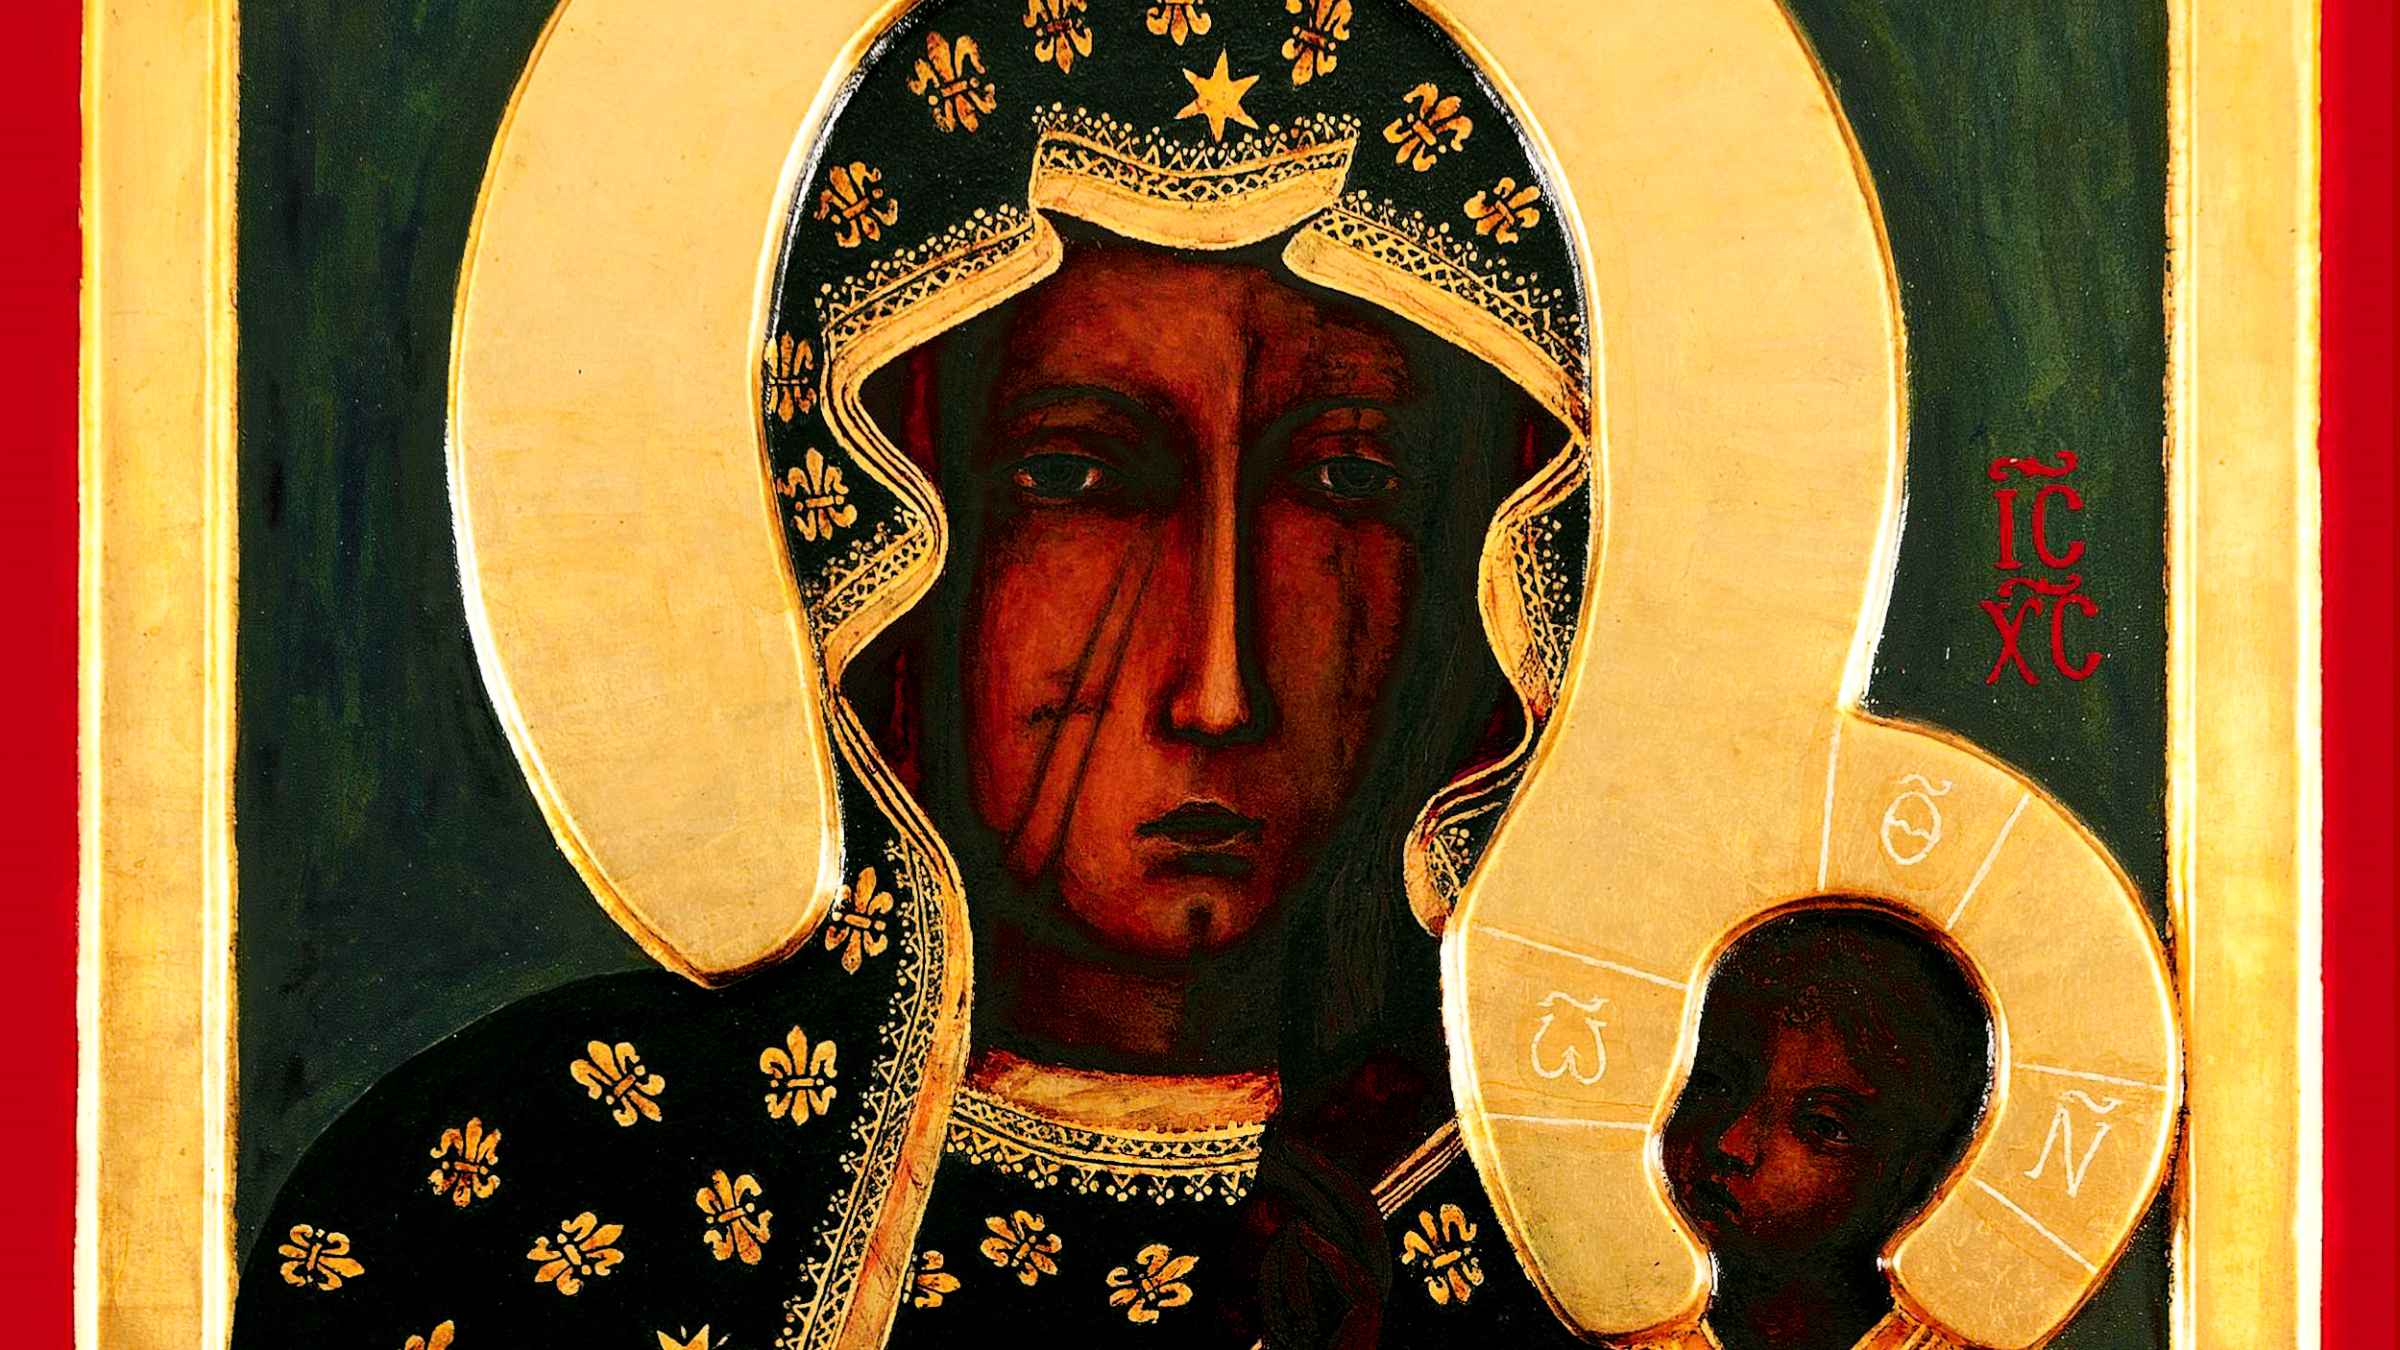 black-madonna-of-cz-stochowa-history-heritage-getyourguide